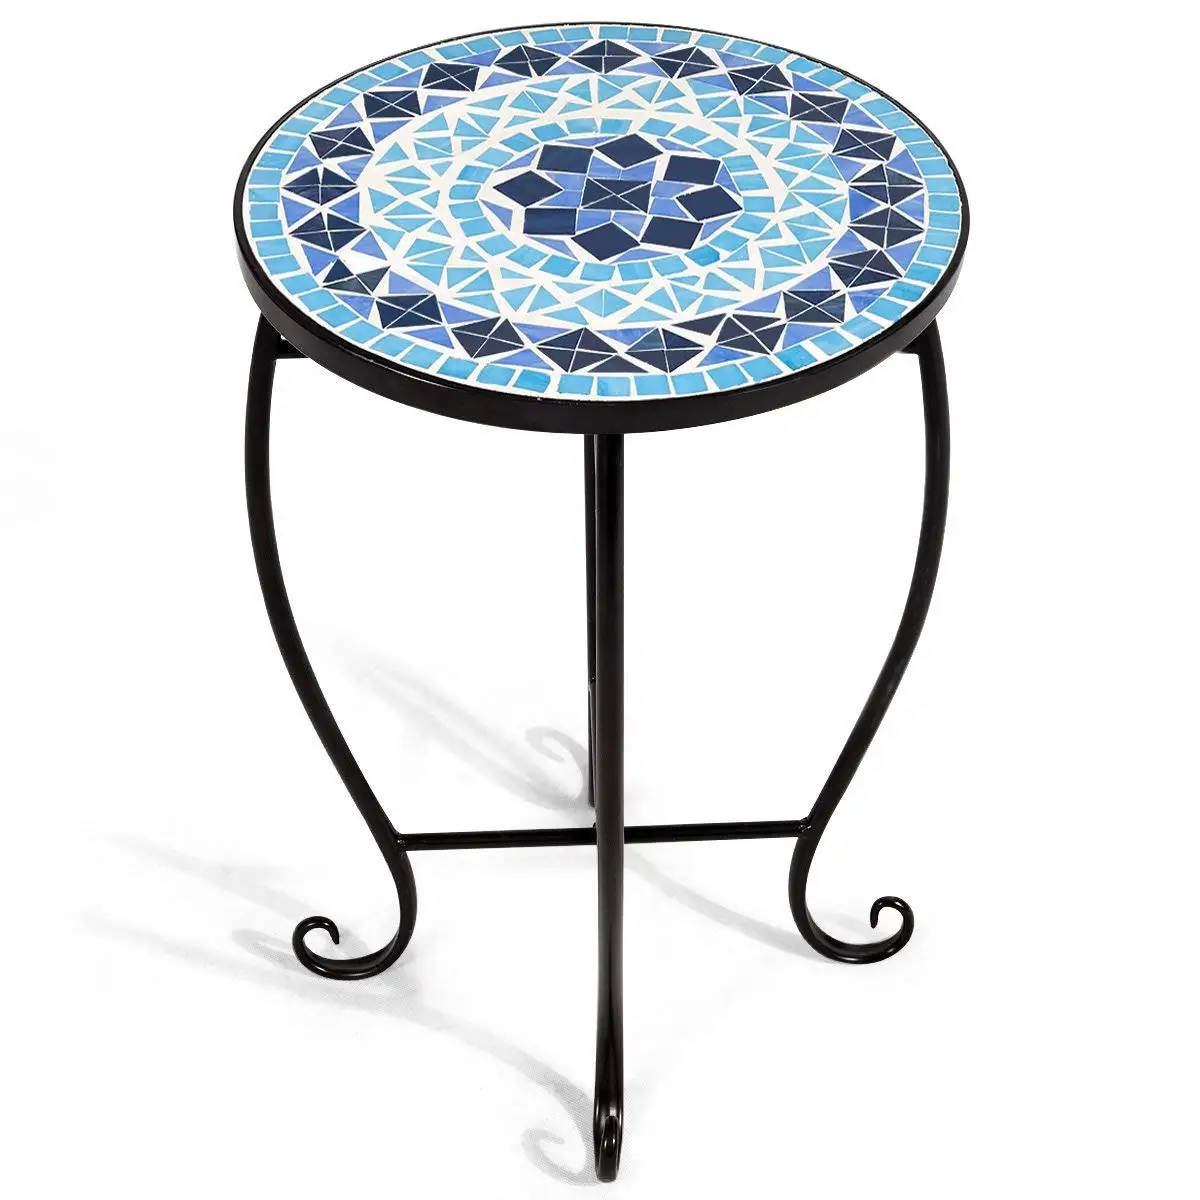 Cheap Outdoor Mosaic Coffee Table Find Outdoor Mosaic Coffee Table Deals On Line At Alibaba Com